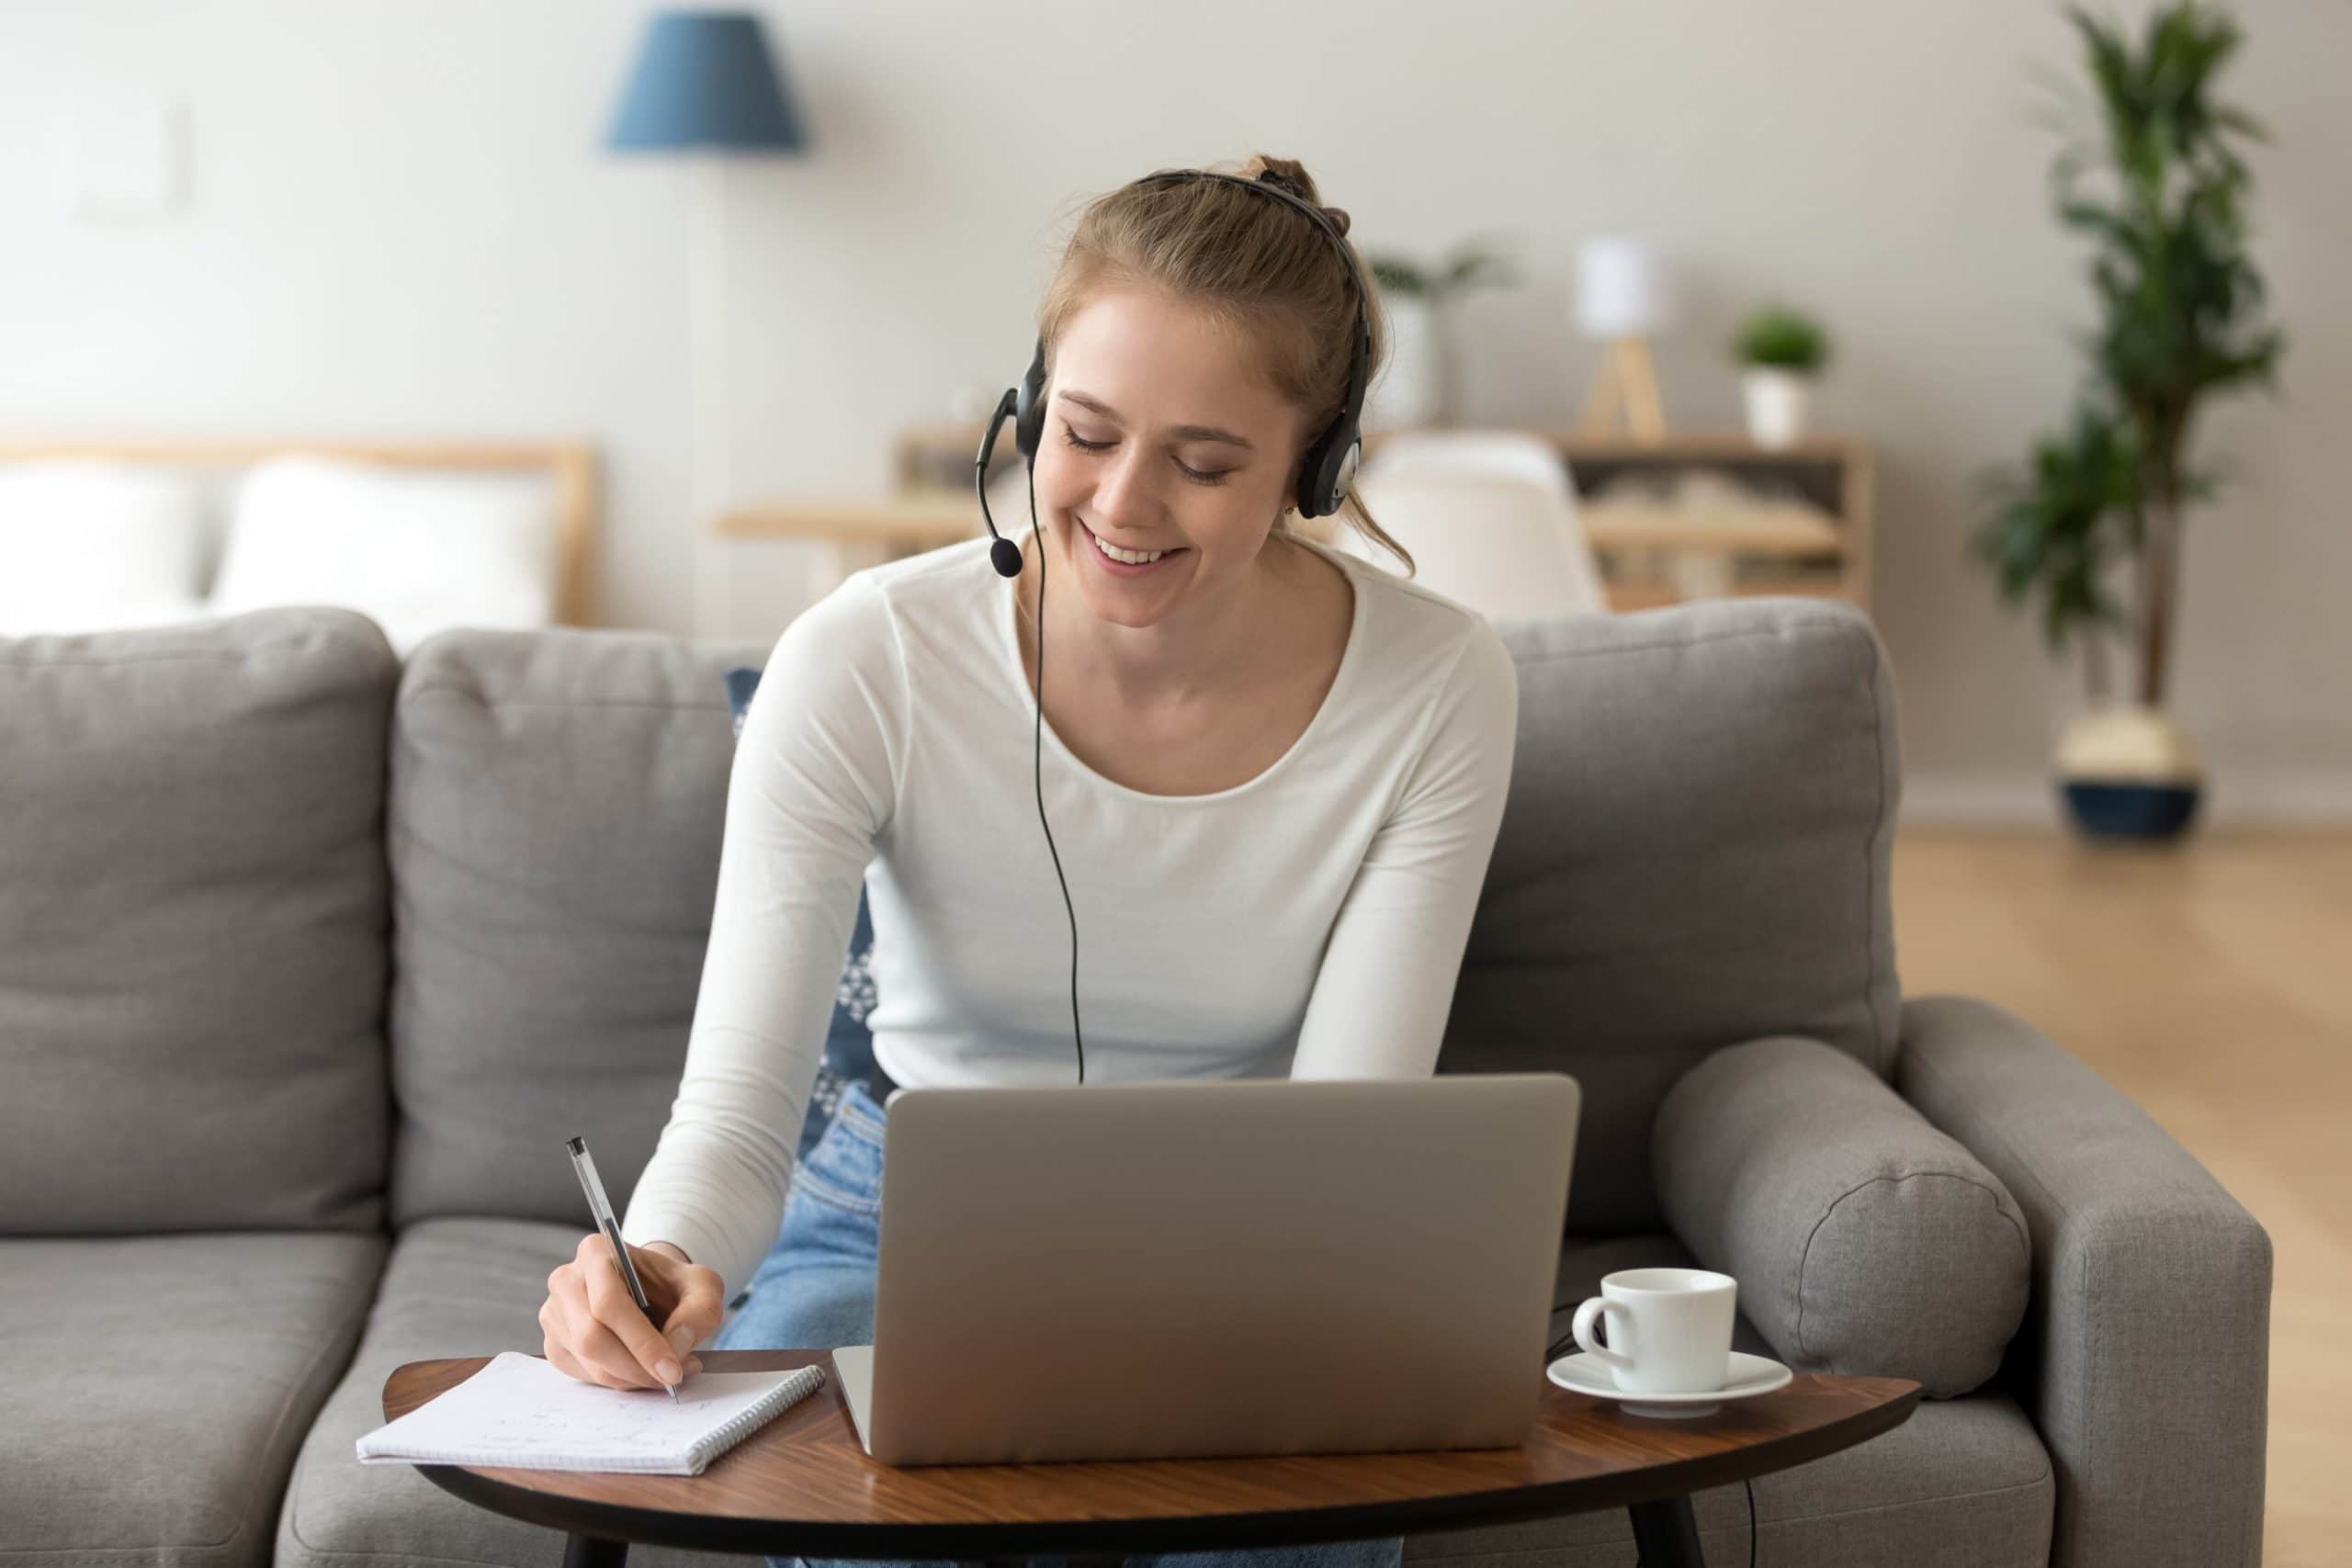 women on customer service call with headset on call, working at computer, taking notes